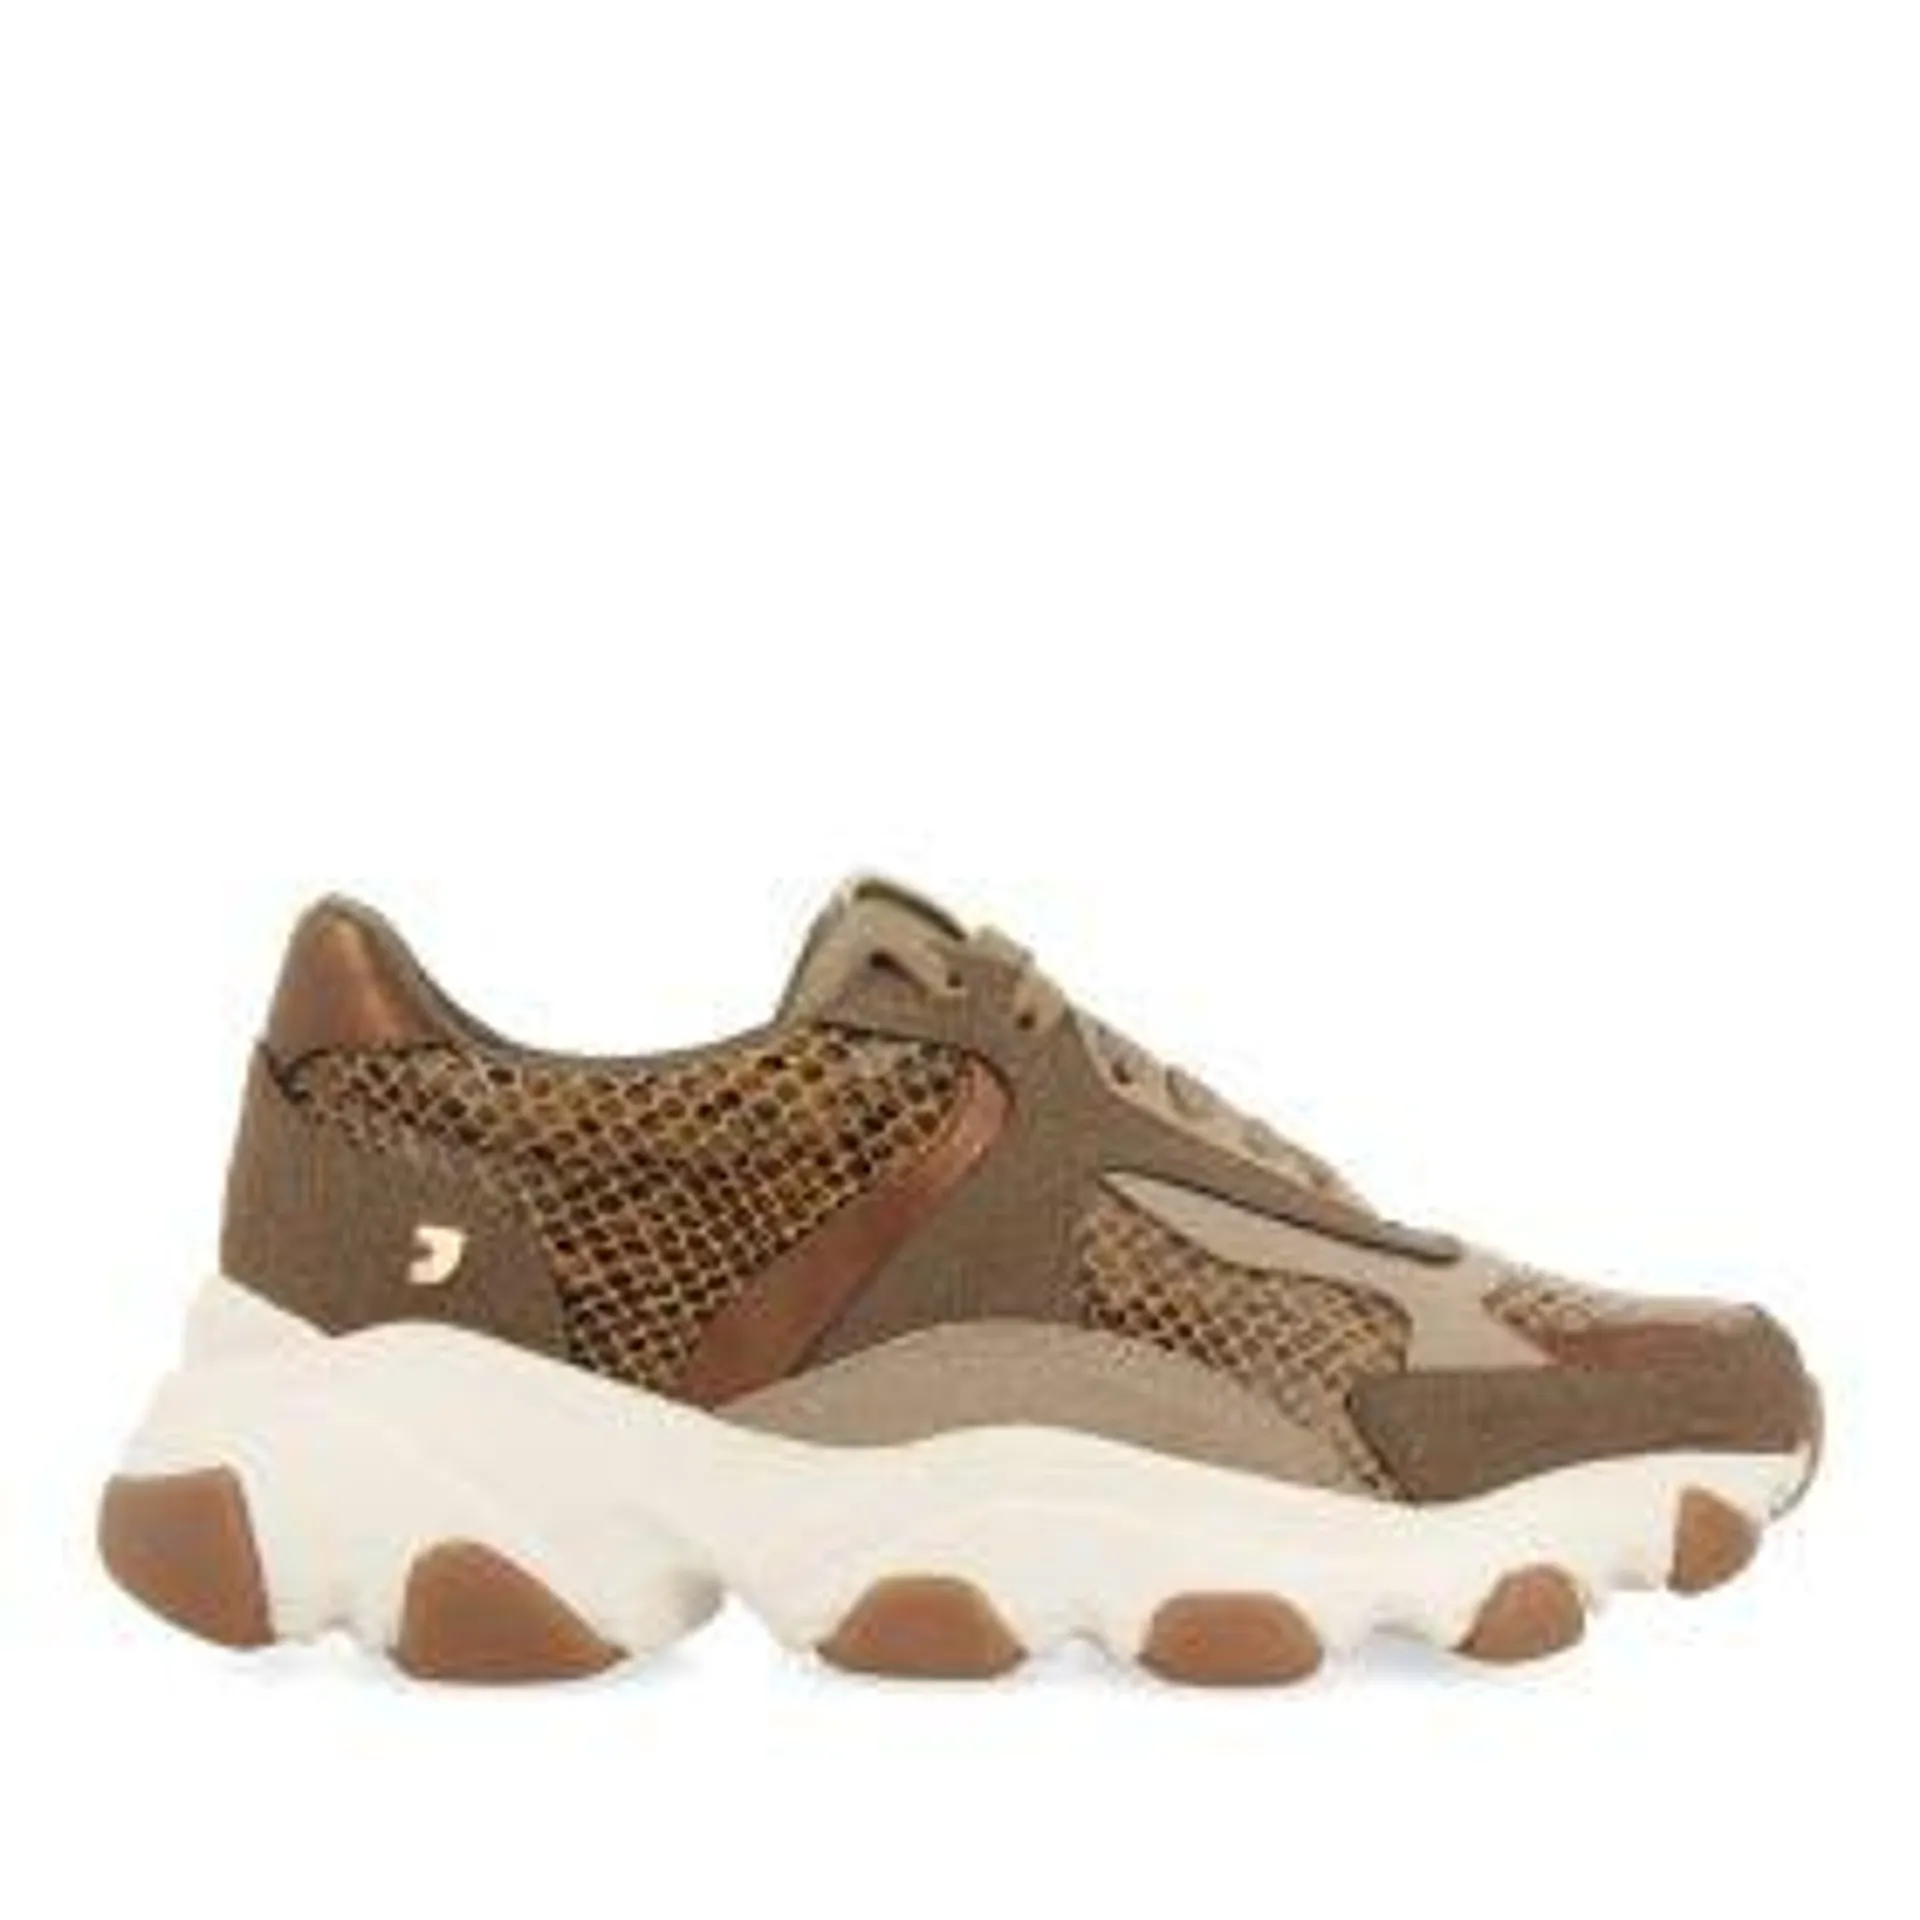 Mansura women's zero waste taupe sneakers with chunky soles